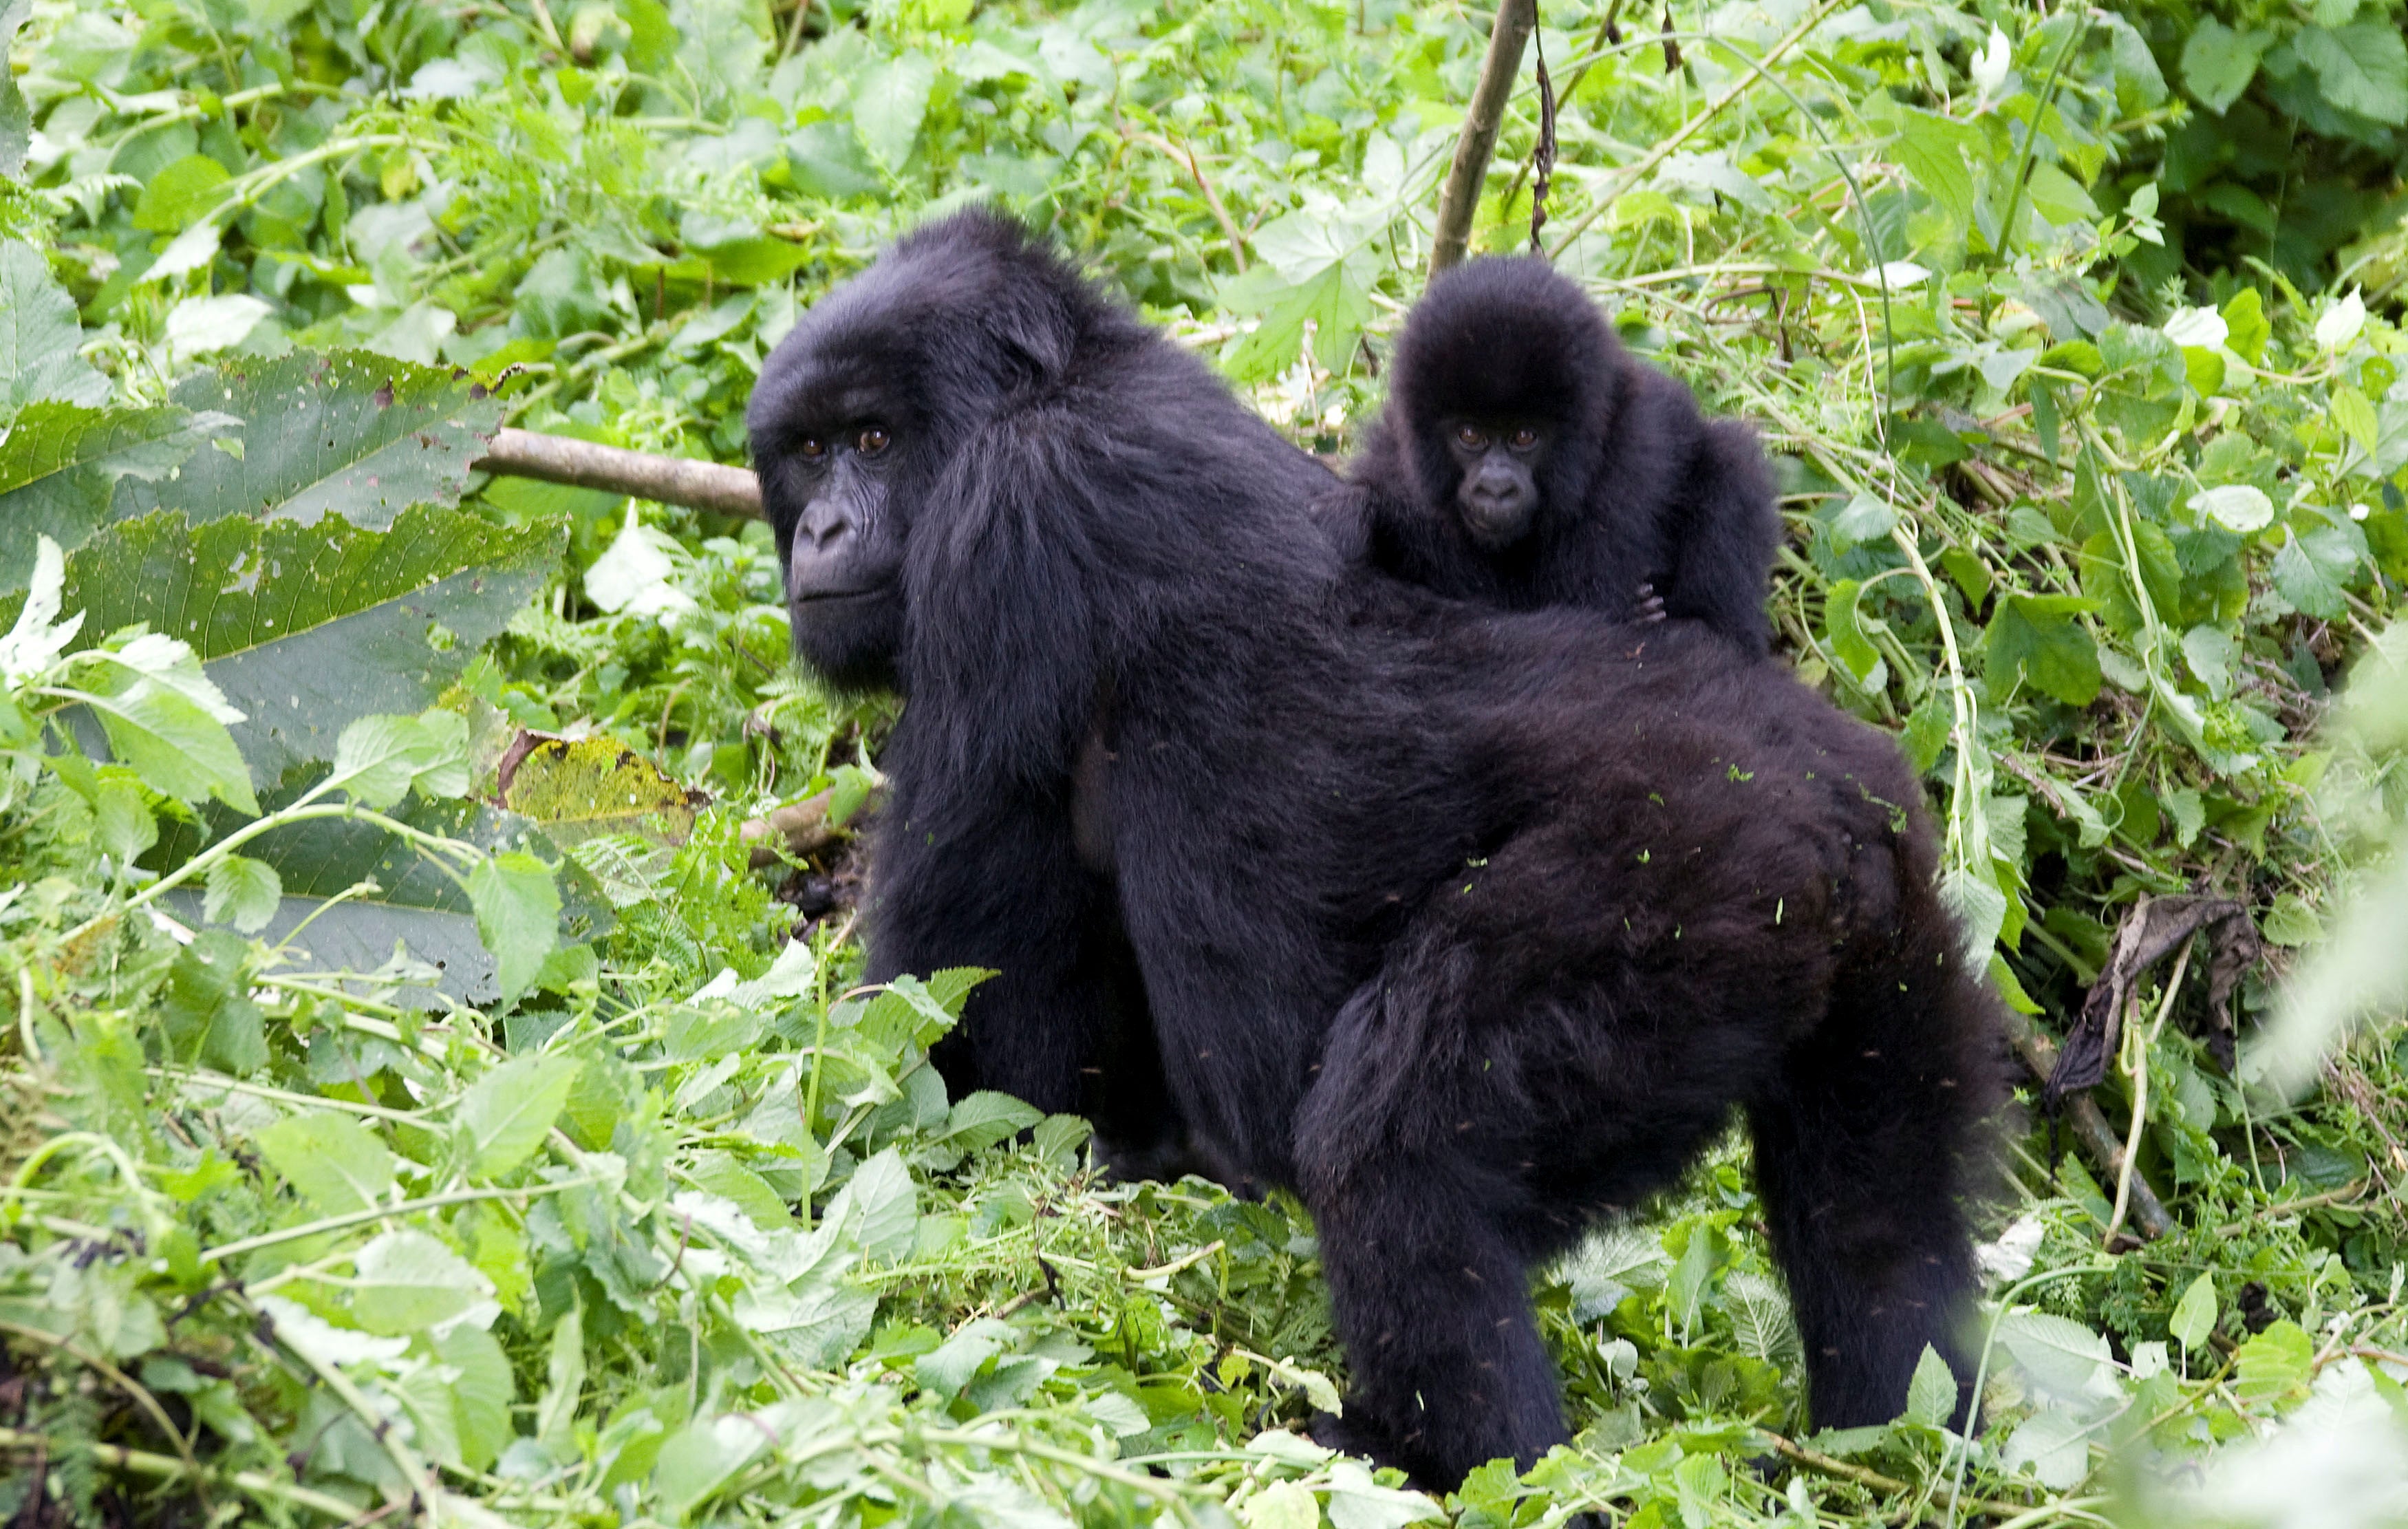 A baby mountain gorilla rides on her mother’s back on the slopes of Mount Mikeno